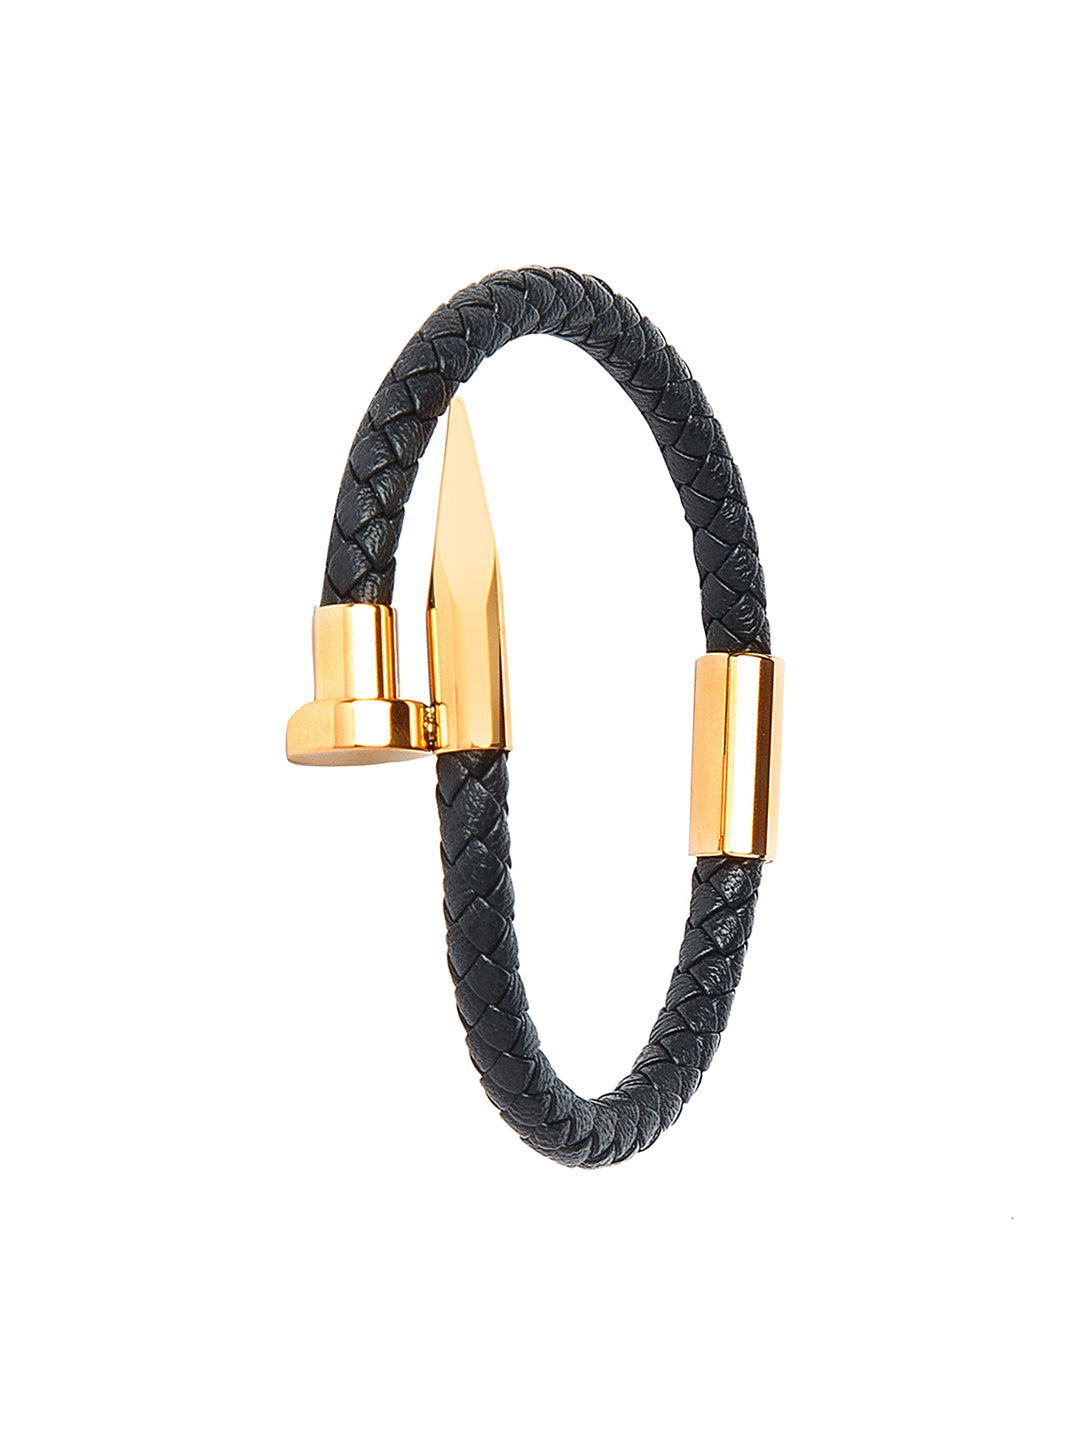 Luxury Designer Love Bracelet For Women And Men Rose Gold Cuff With Silver  Rhodium Polish Bangles, Titanium Steel Screwdriver, And Diamond Accents,  Complete With Velvet Bag From Fashionwatch197, $14.62 | DHgate.Com